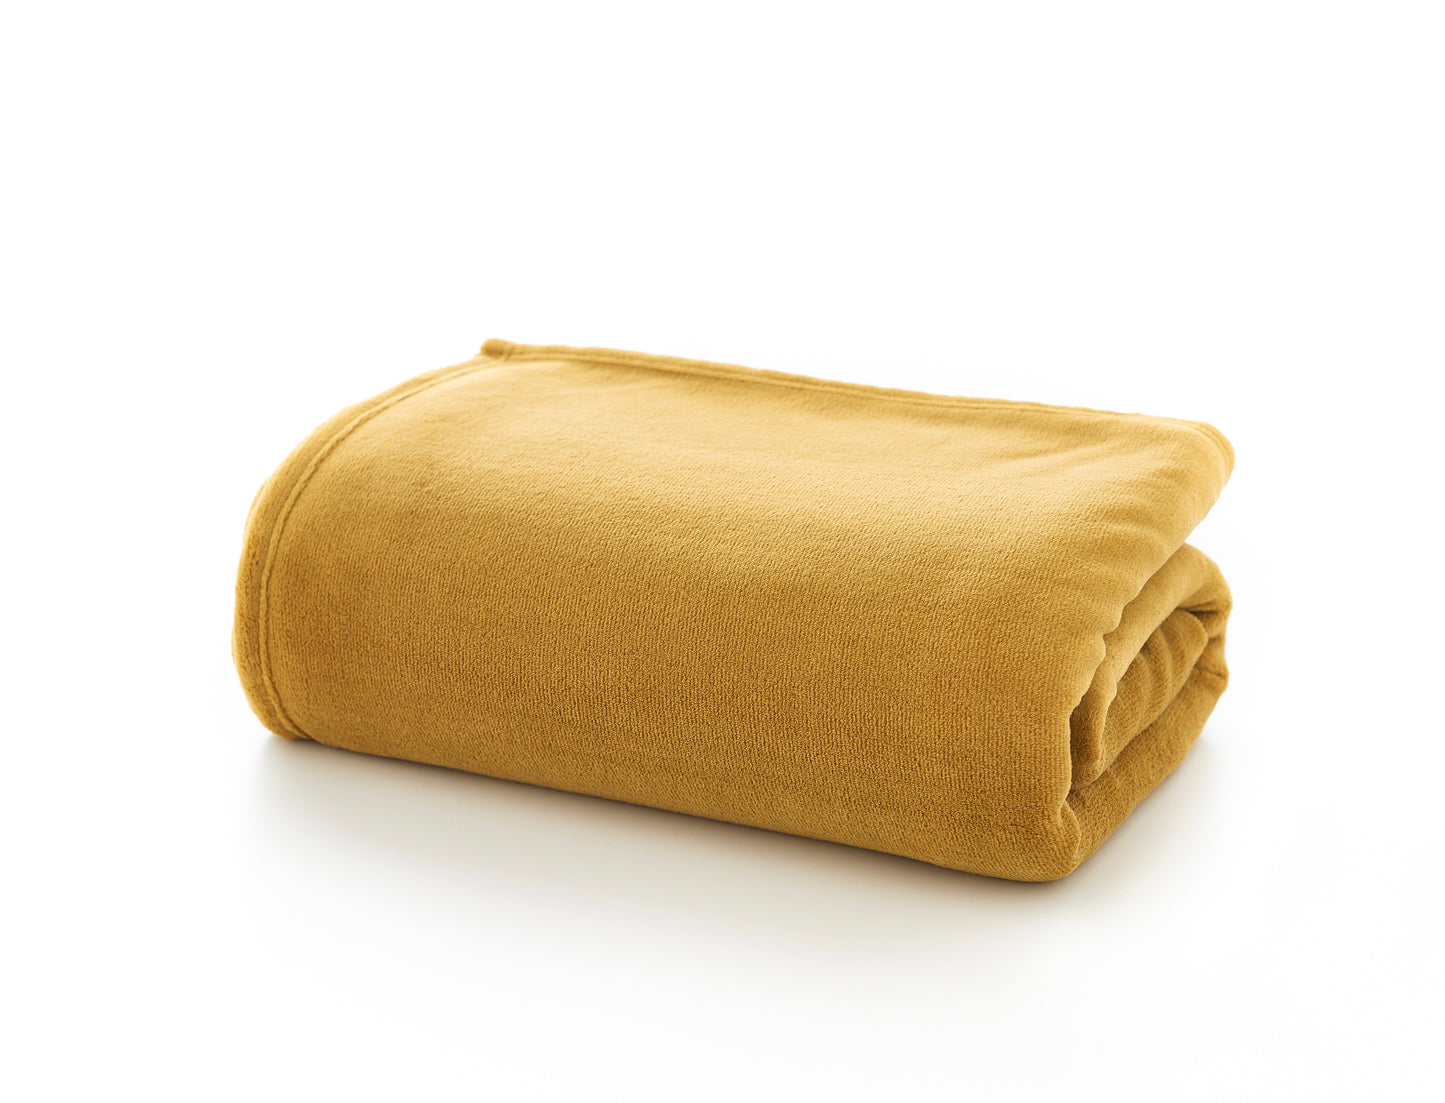 Extra Large Snuggletouch Supersoft Throw in Ochre Yellow